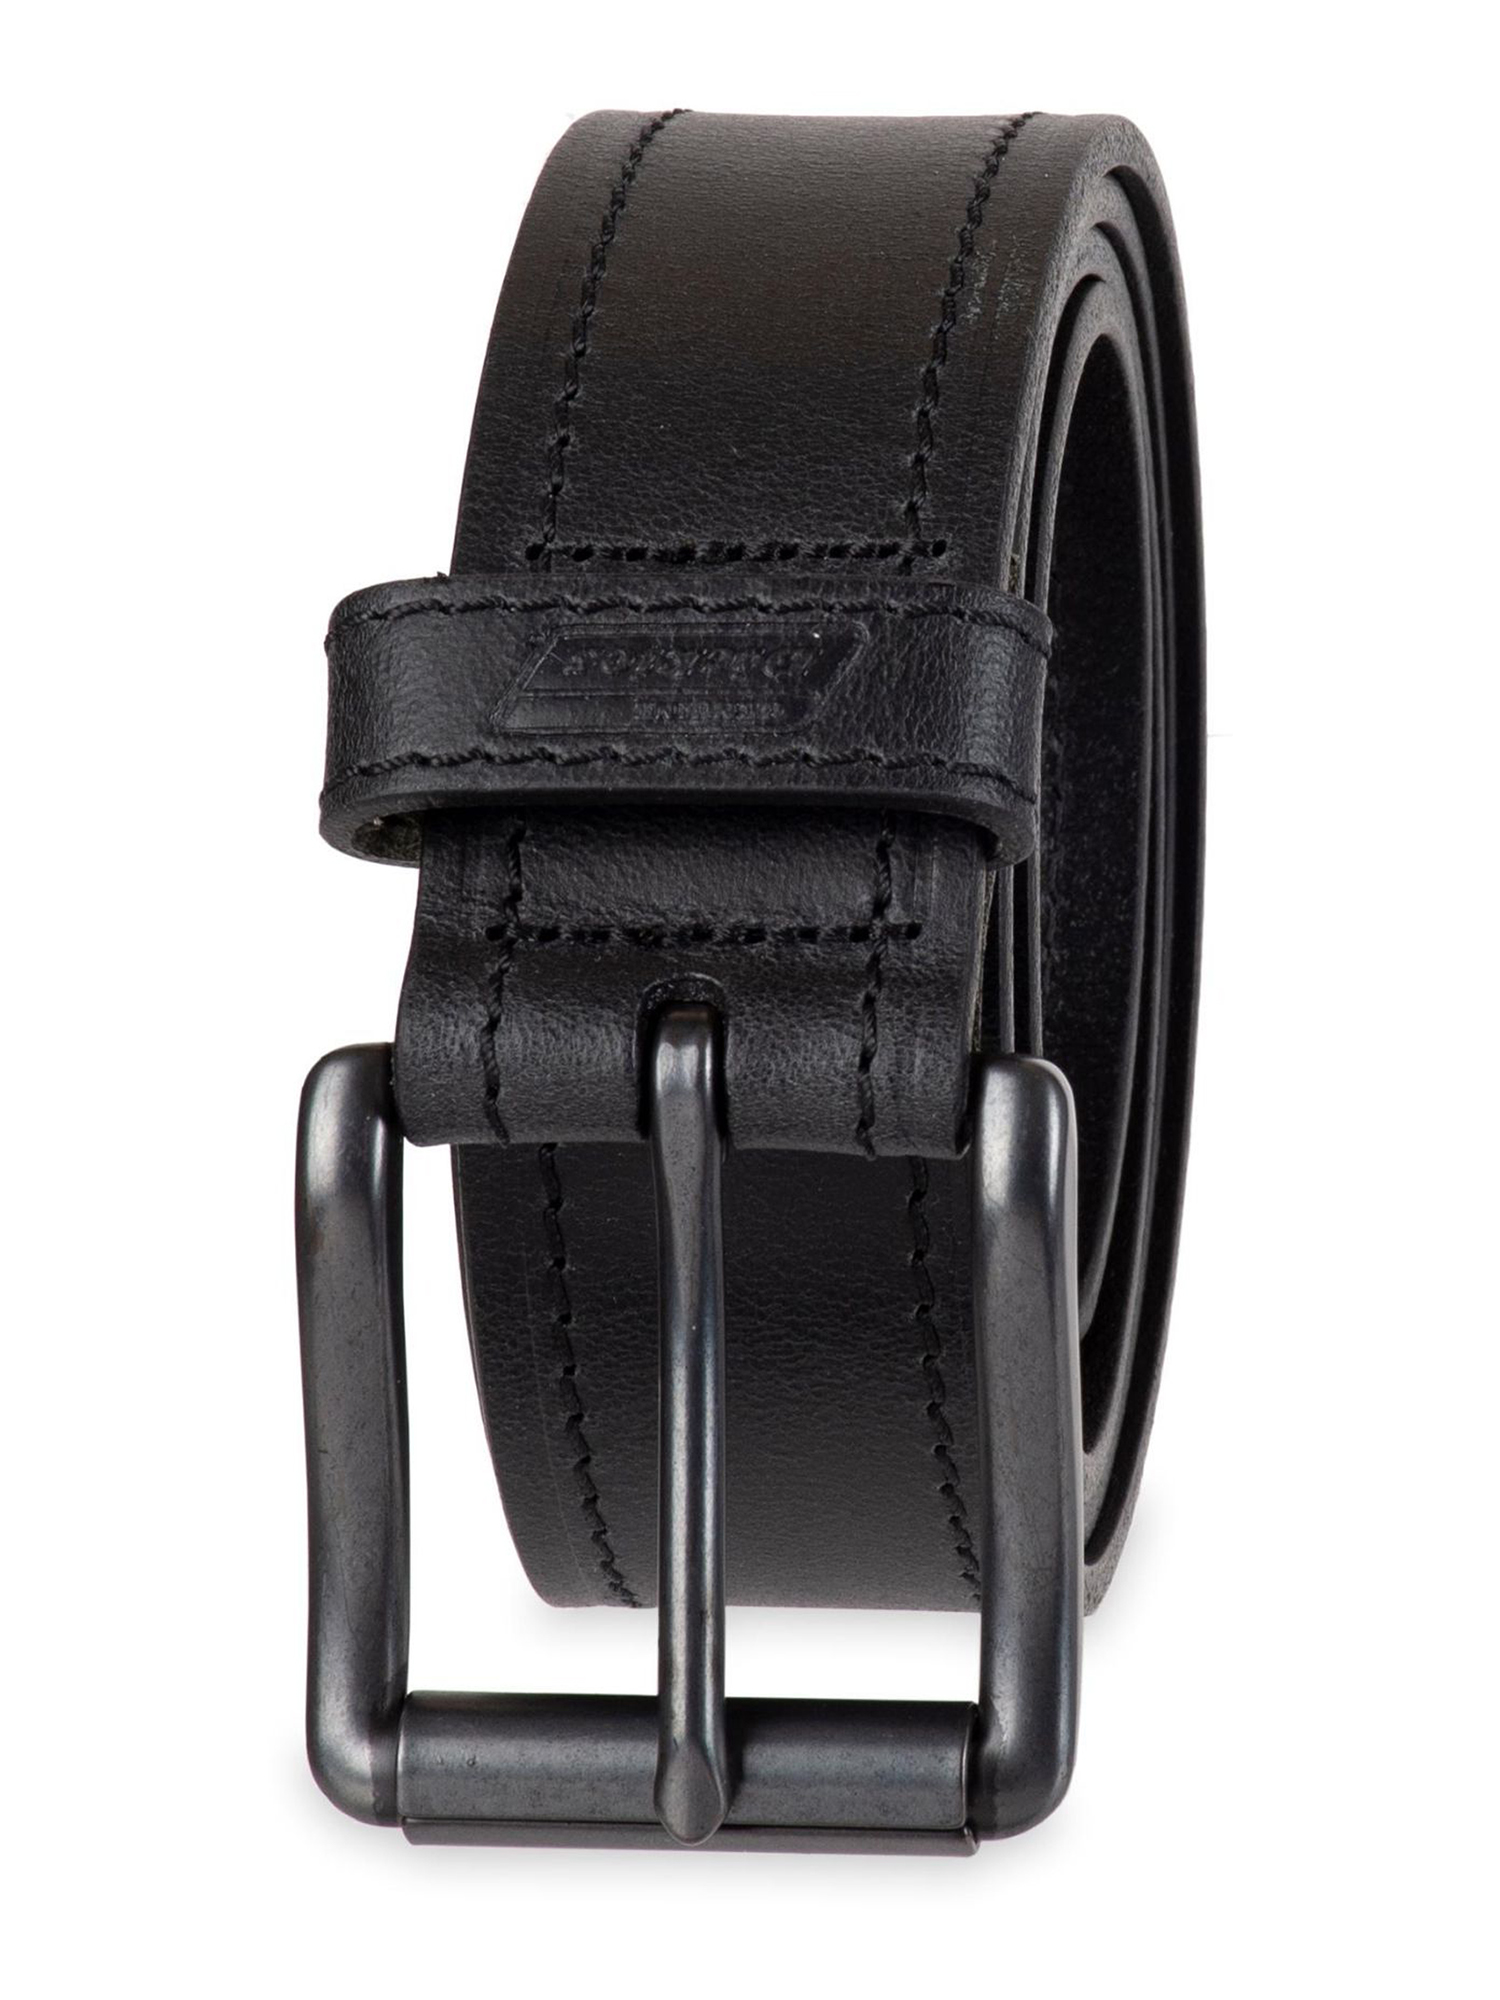 Genuine Dickies Men's Casual Black Leather Work Belt with Roller Buckle (Regular and Big & Tall Sizes) - image 4 of 6